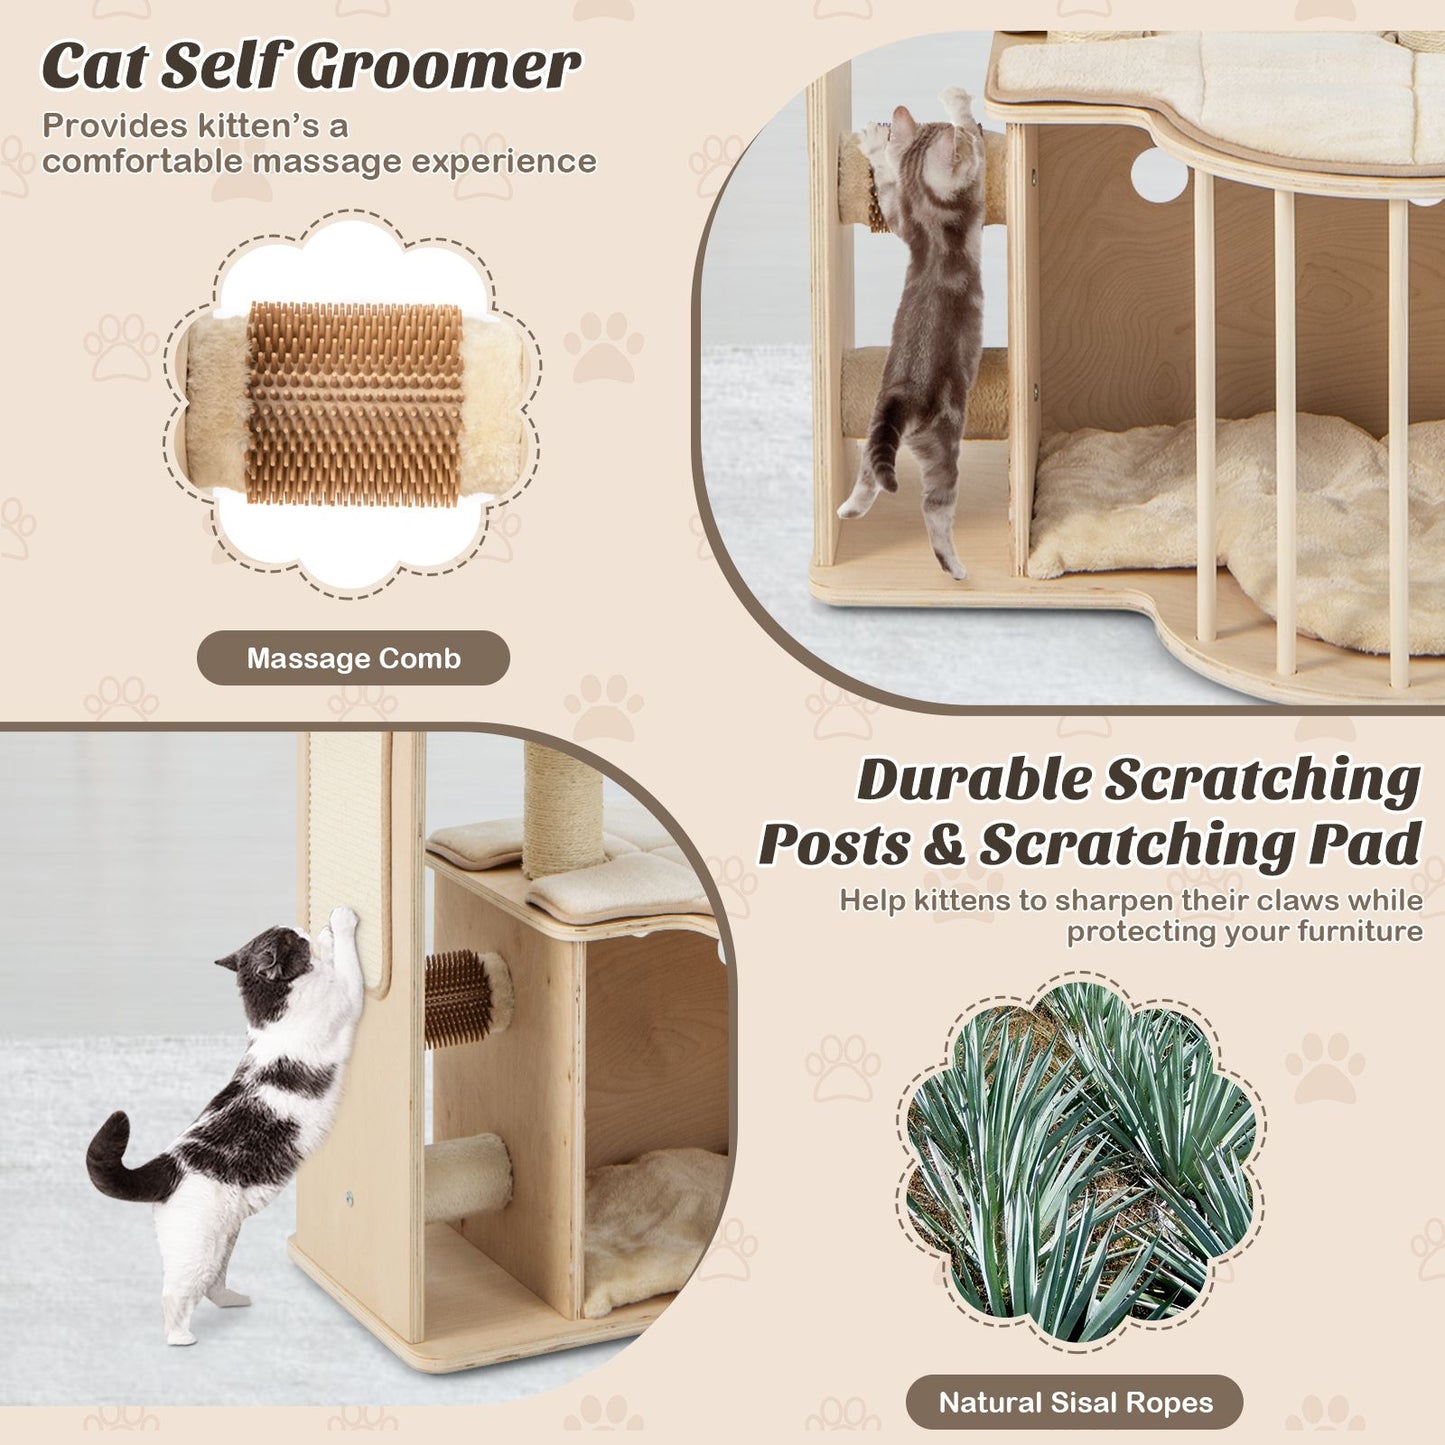 Tall Cat Tree with Hammock Condo and Sisal Scratching Posts